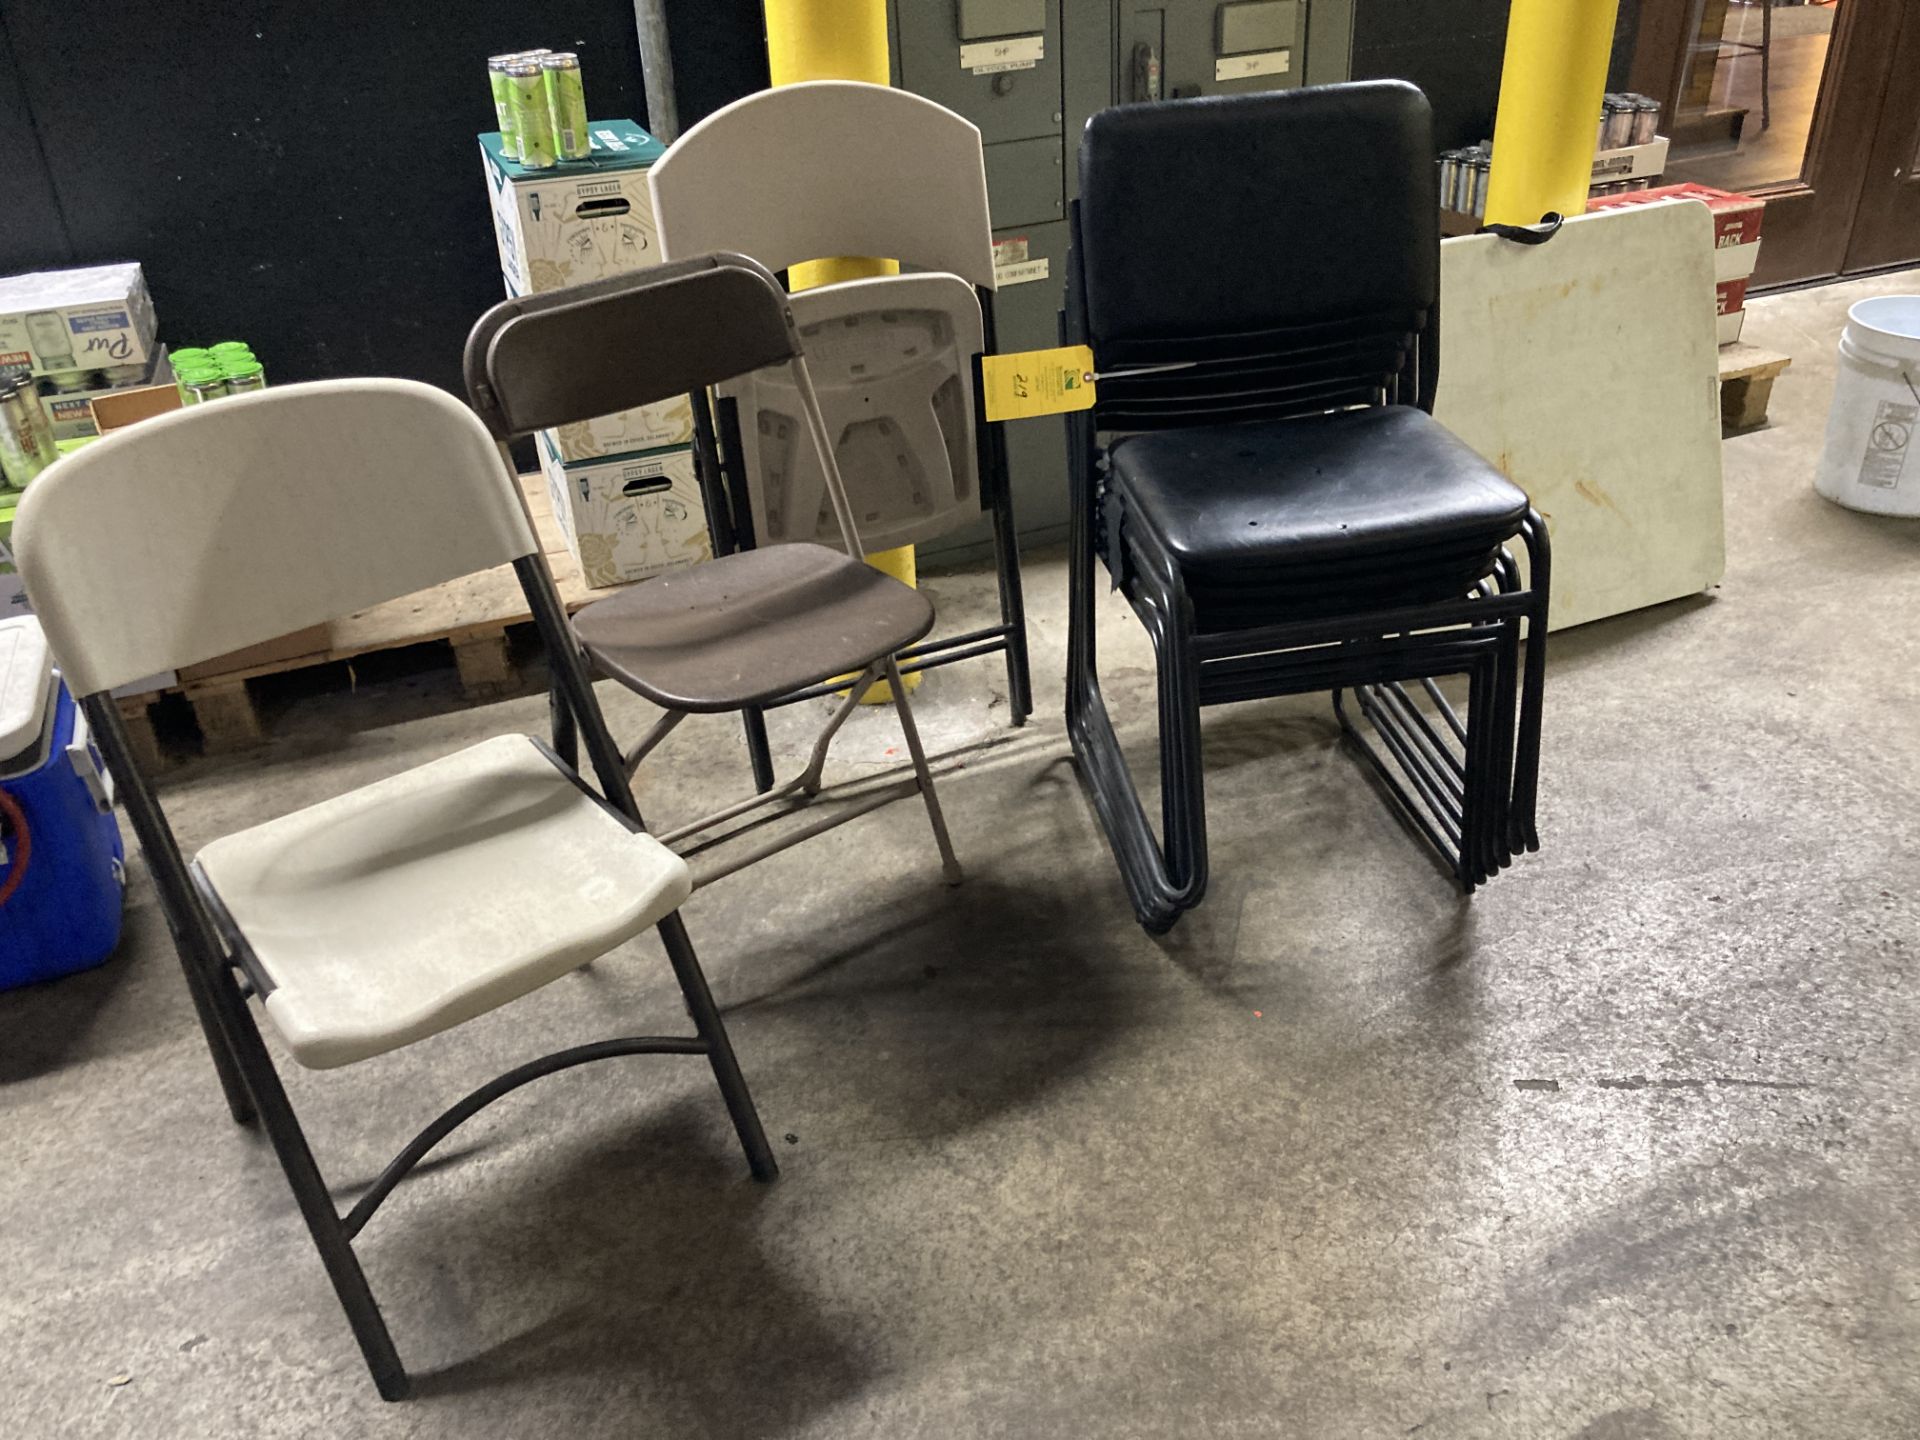 LOT OF chair, 4 padded chair, 3 folding chair ***Rigging and Loading Fee of$: TBD will be